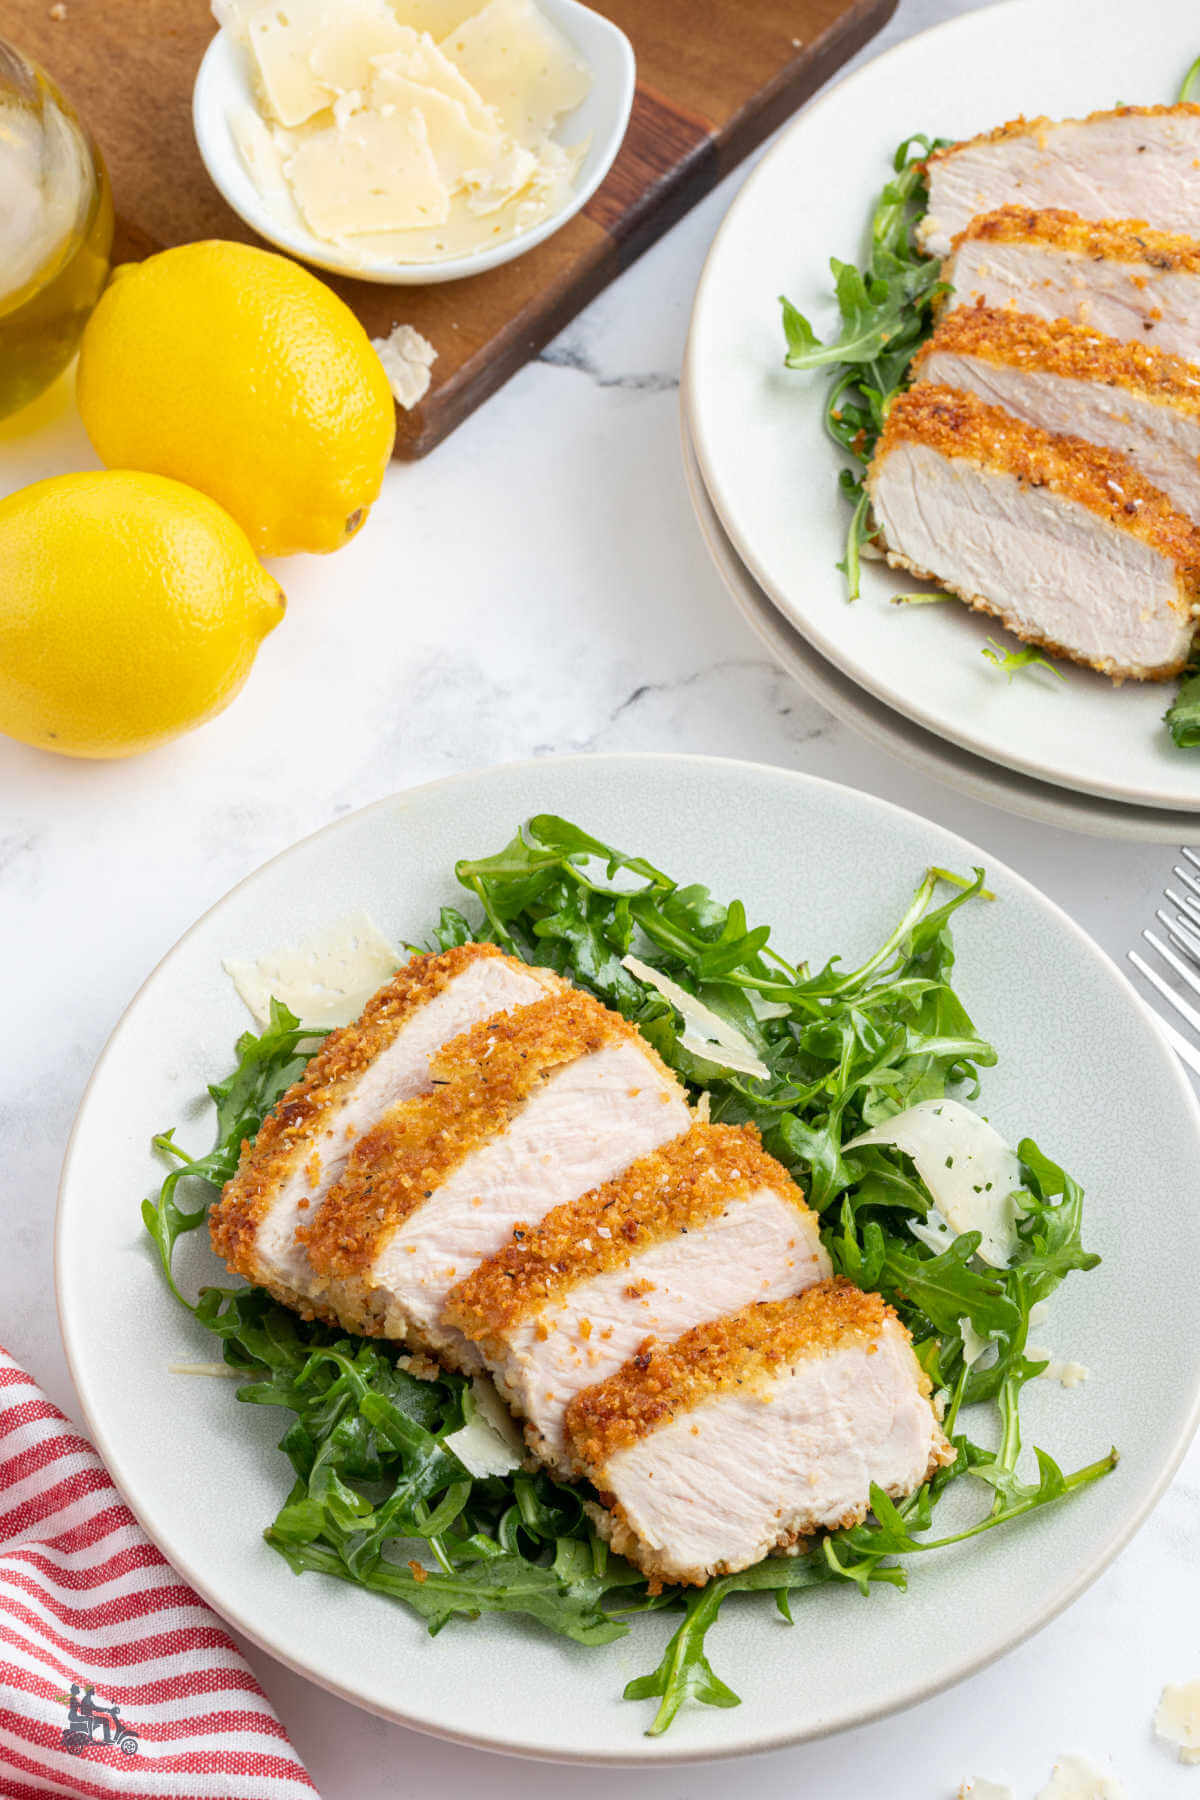 Two plates with a servings of the breaded  fried pork on a bed of arugula salad. 